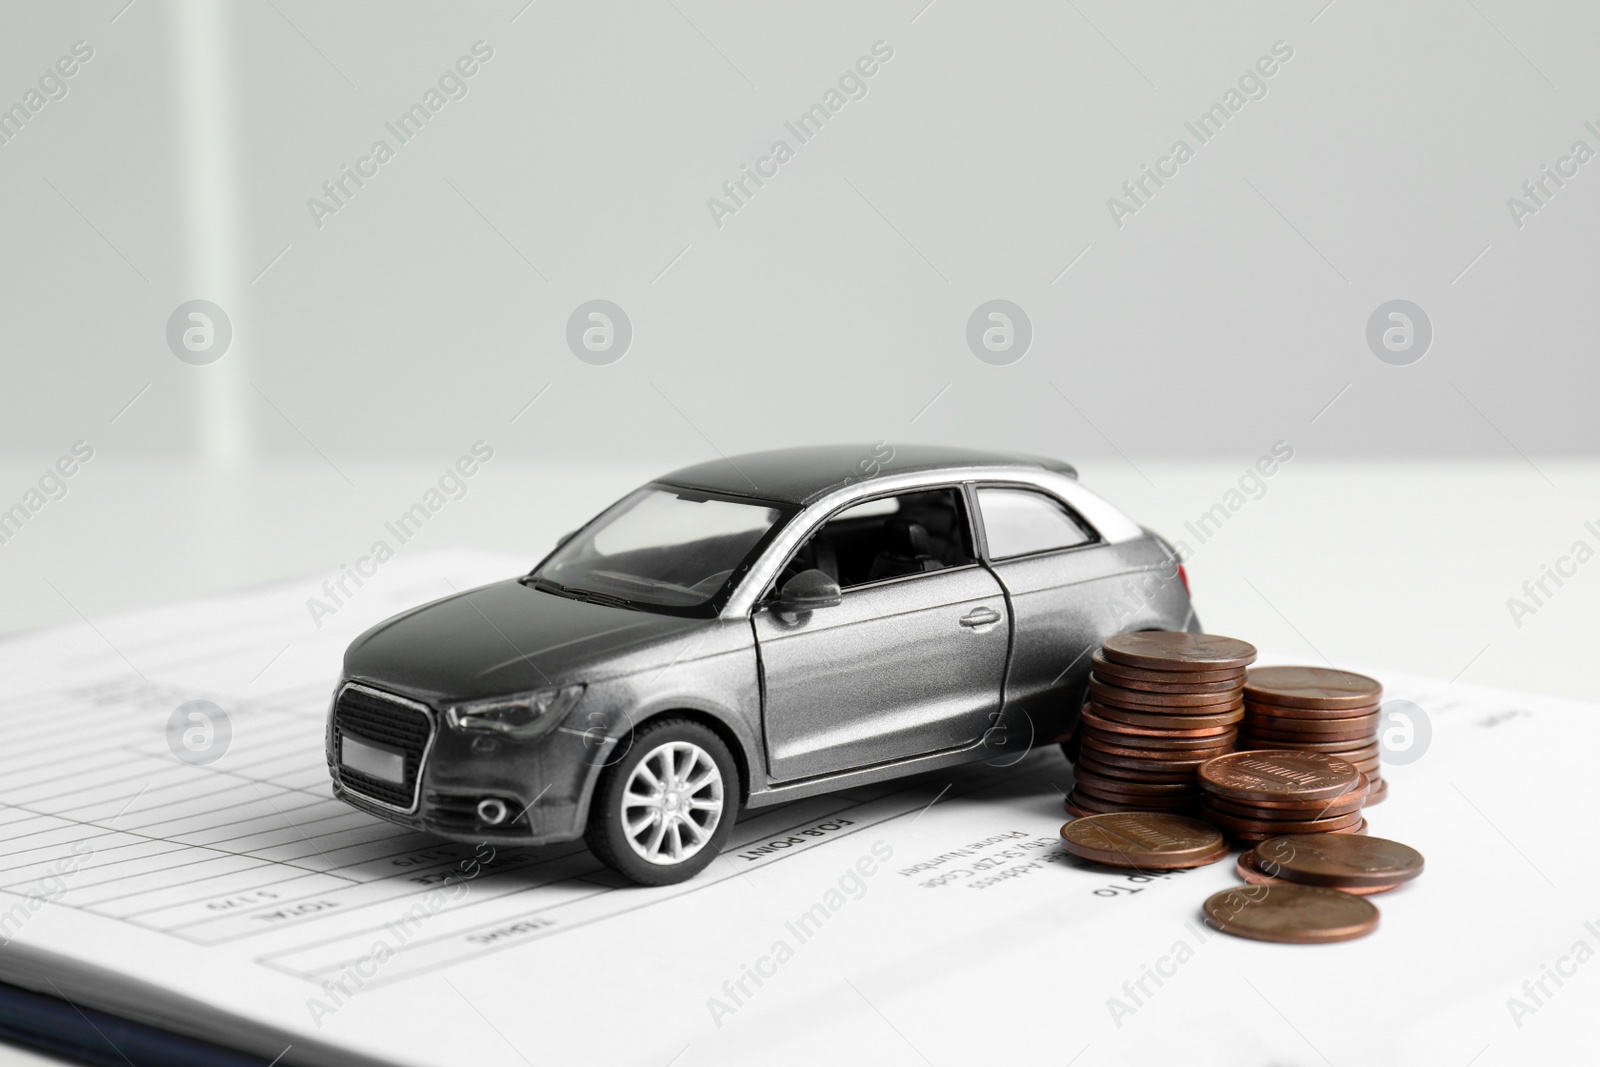 Photo of Toy car, money and insurance contract on table